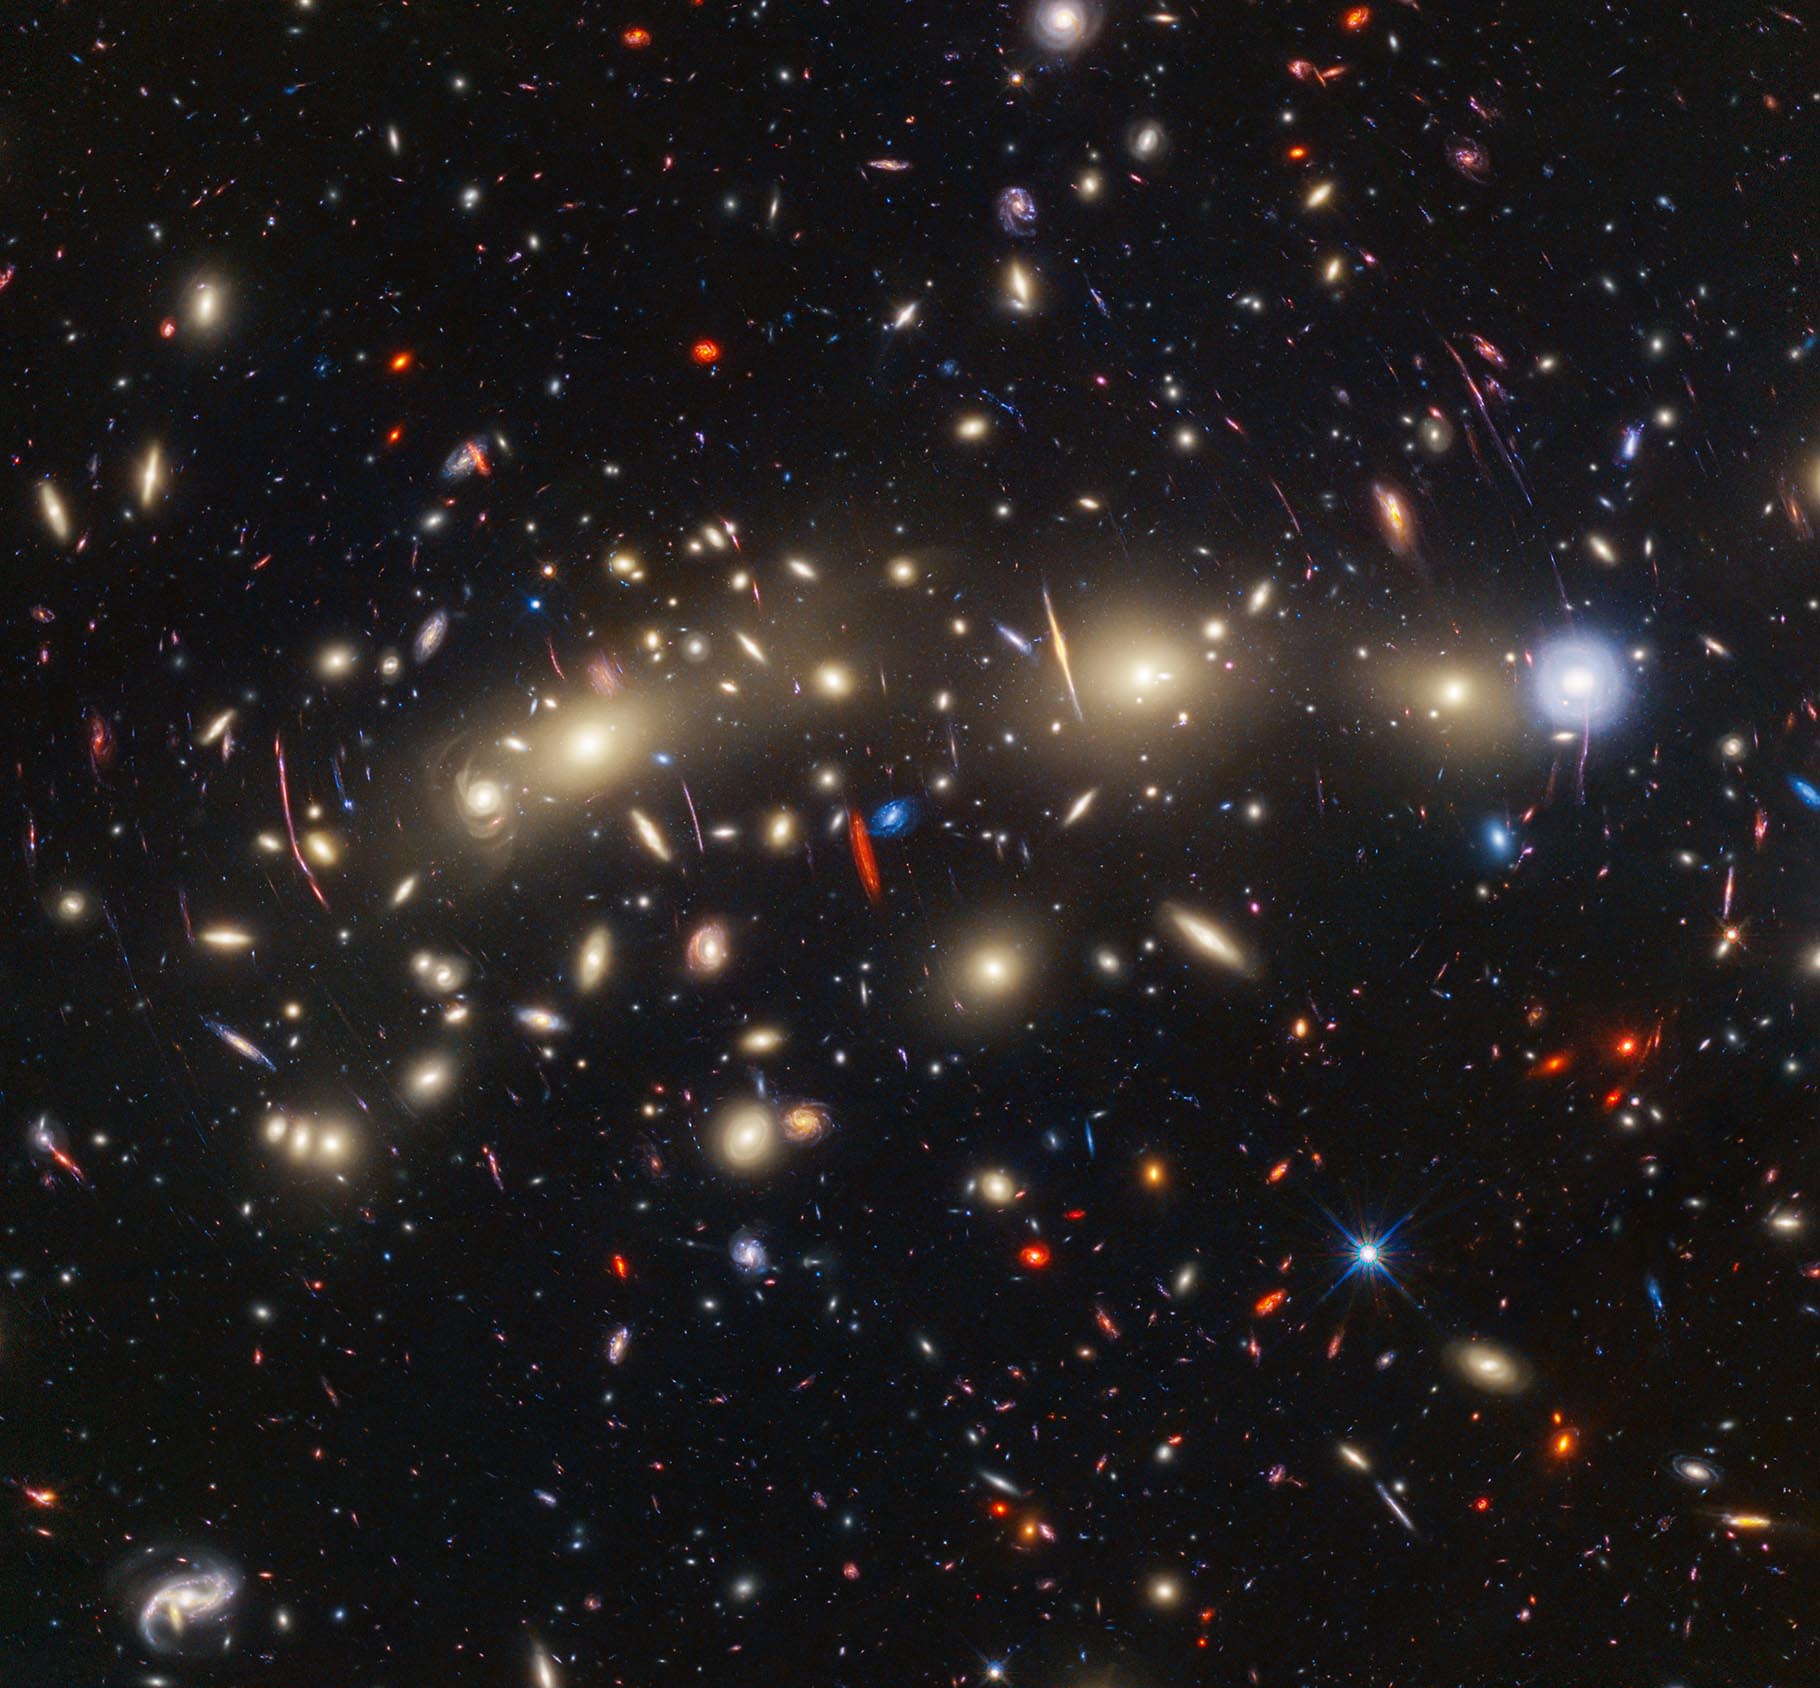 A field of galaxies on the black background of space. In the middle, stretching from left to right, is a collection of dozens of yellowish spiral and elliptical galaxies that form a foreground galaxy cluster. They form a rough, flat line along the center. Among them are distorted linear features, which mostly appear to follow invisible concentric circles curving around the center of the image. The linear features are created when the light of a background galaxy is bent and magnified through gravitational lensing. At center left, a particularly prominent example stretches vertically about three times the length of a nearby galaxy. A variety of brightly colored, red and blue galaxies of various shapes are scattered across the image, making it feel densely populated. Near the center are two tiny galaxies compared to the galaxy cluster: a very red edge-on spiral and a very blue face-on spiral, which provide a striking color contrast.